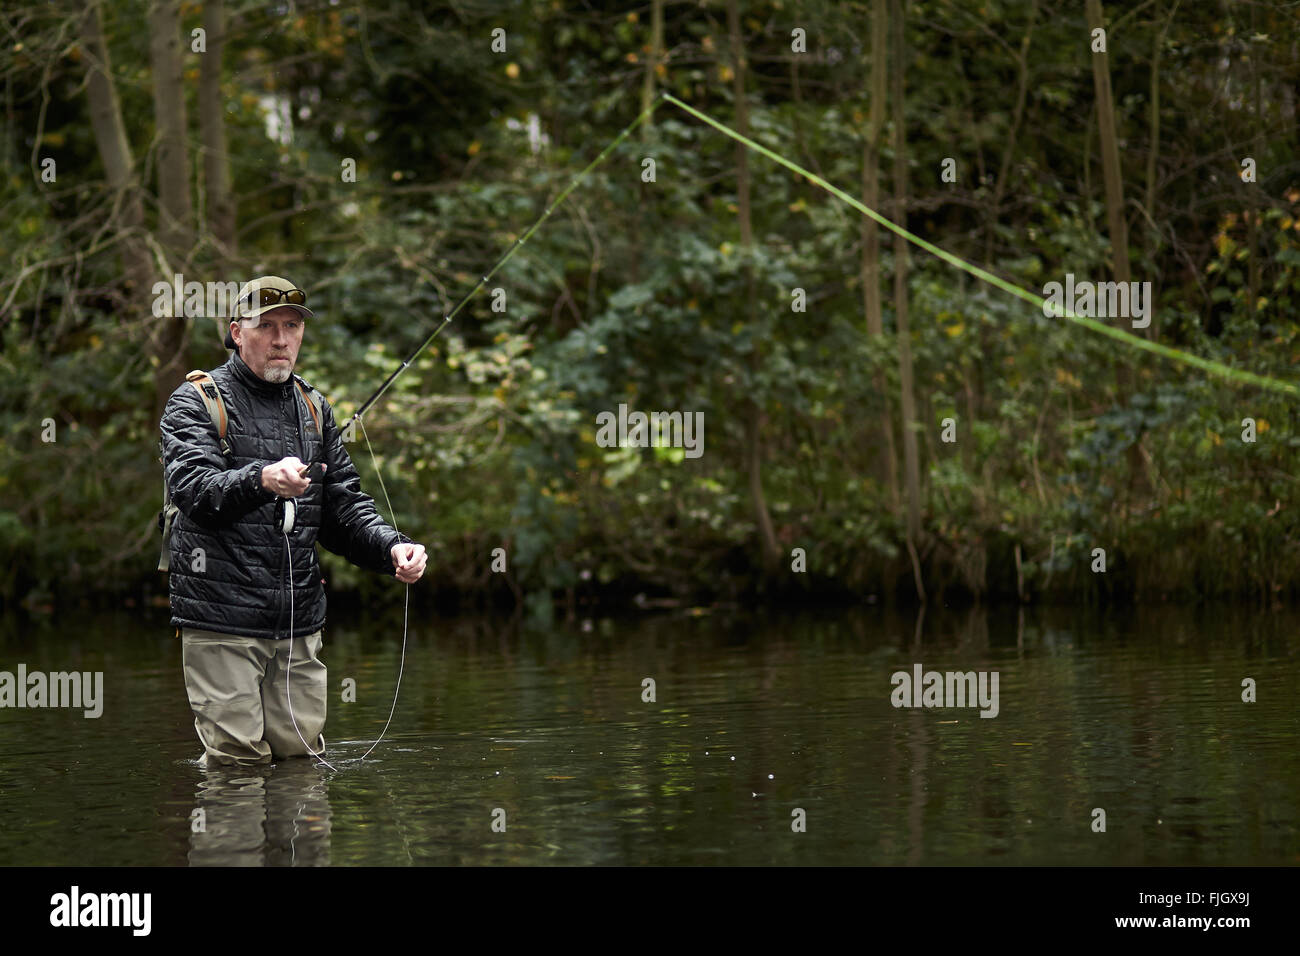 A man fly fishing in a river - London, UK Stock Photo